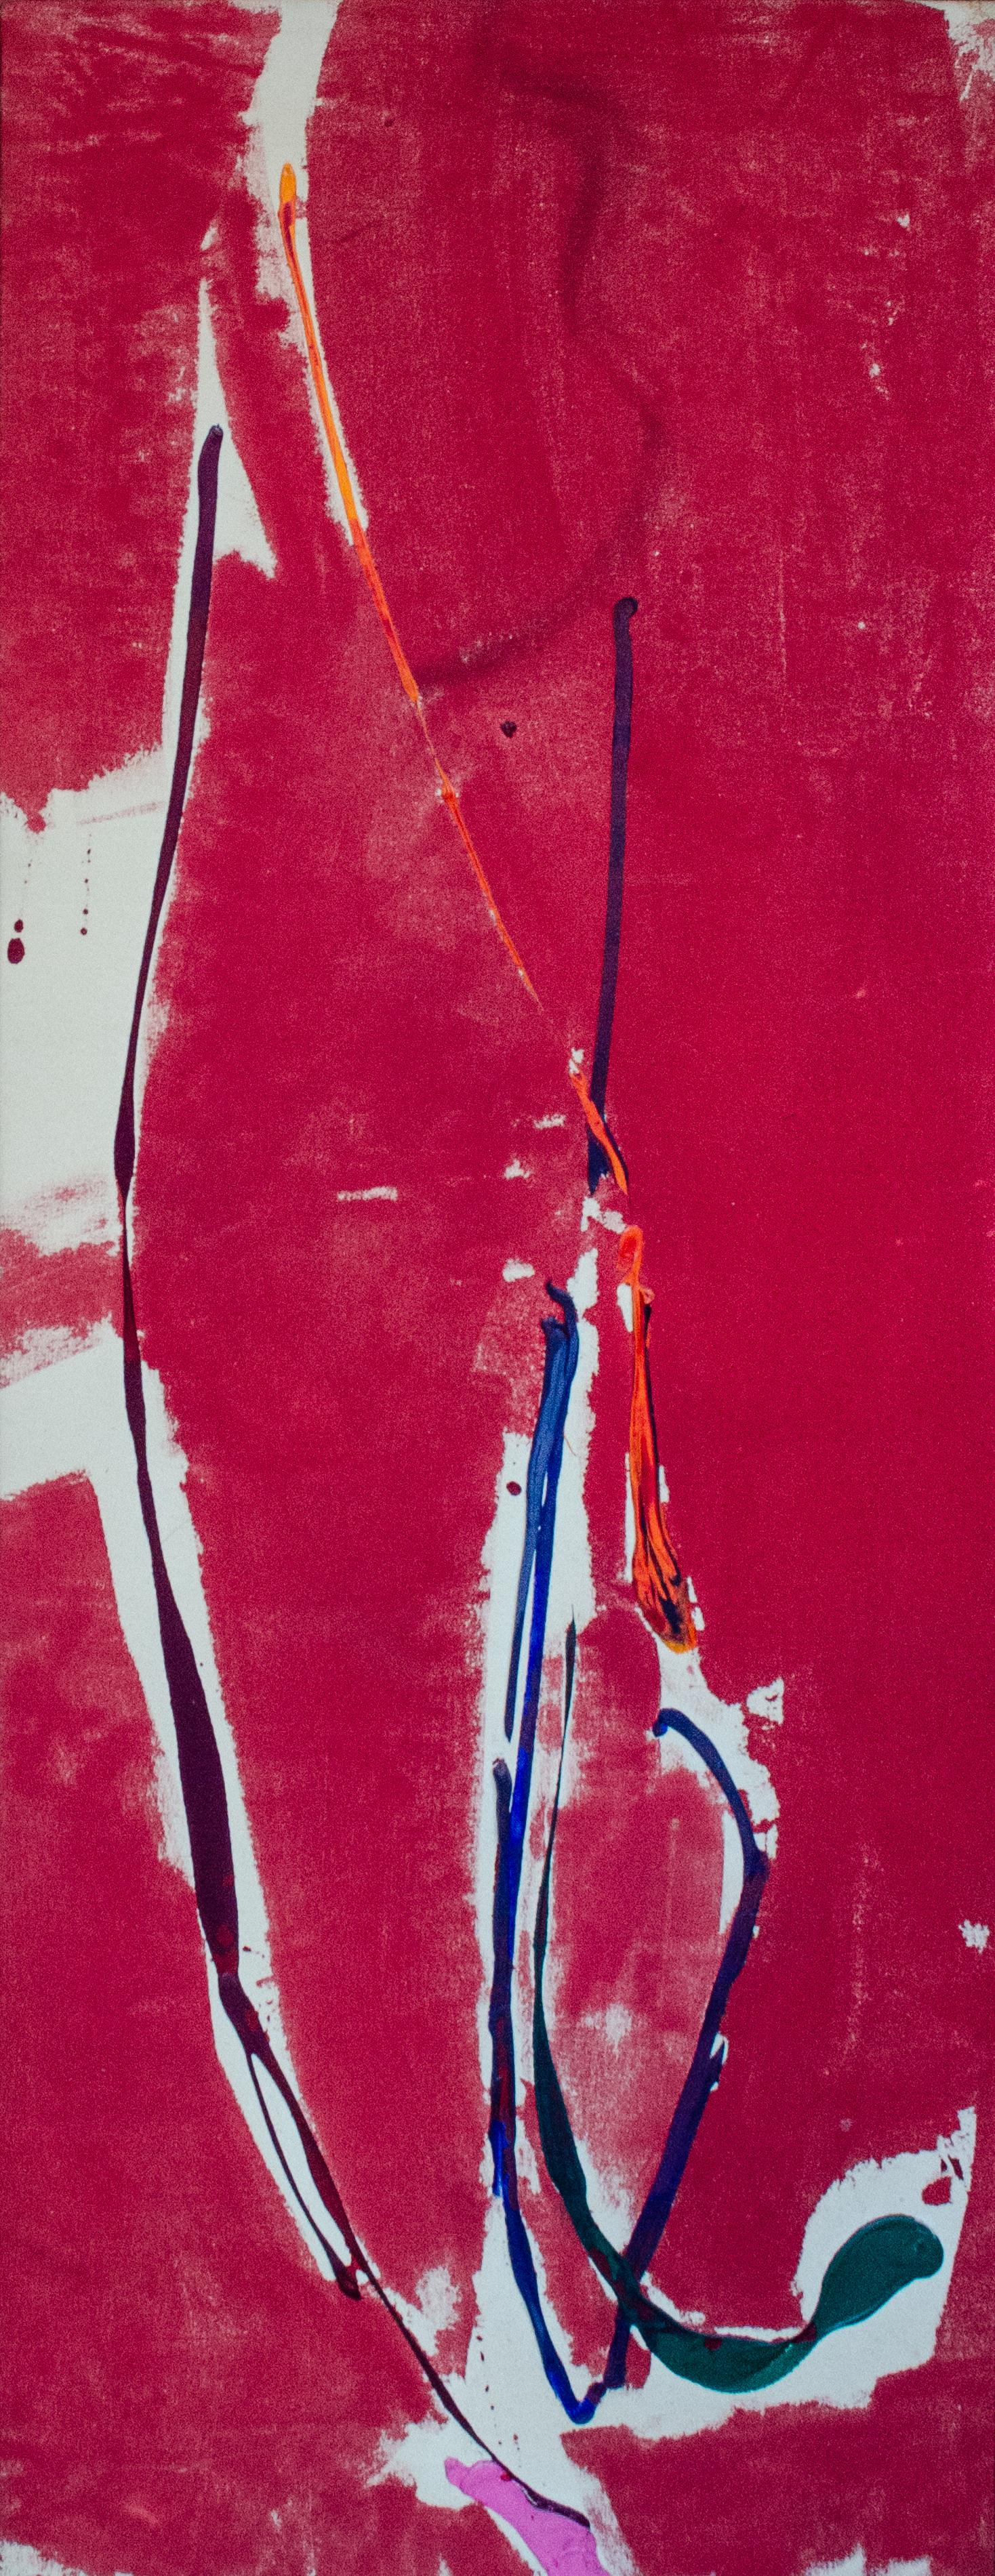 Sherron Francis
Strawberry 5, 1977
Signed, titled and dated on the reverse
Acrylic and mixed media on canvas
56 1/2 x 22 inches

Artists such as Helen Frankenthaler, Morris Louis, Dan Christensen, and Sam Francis are already well-known names.